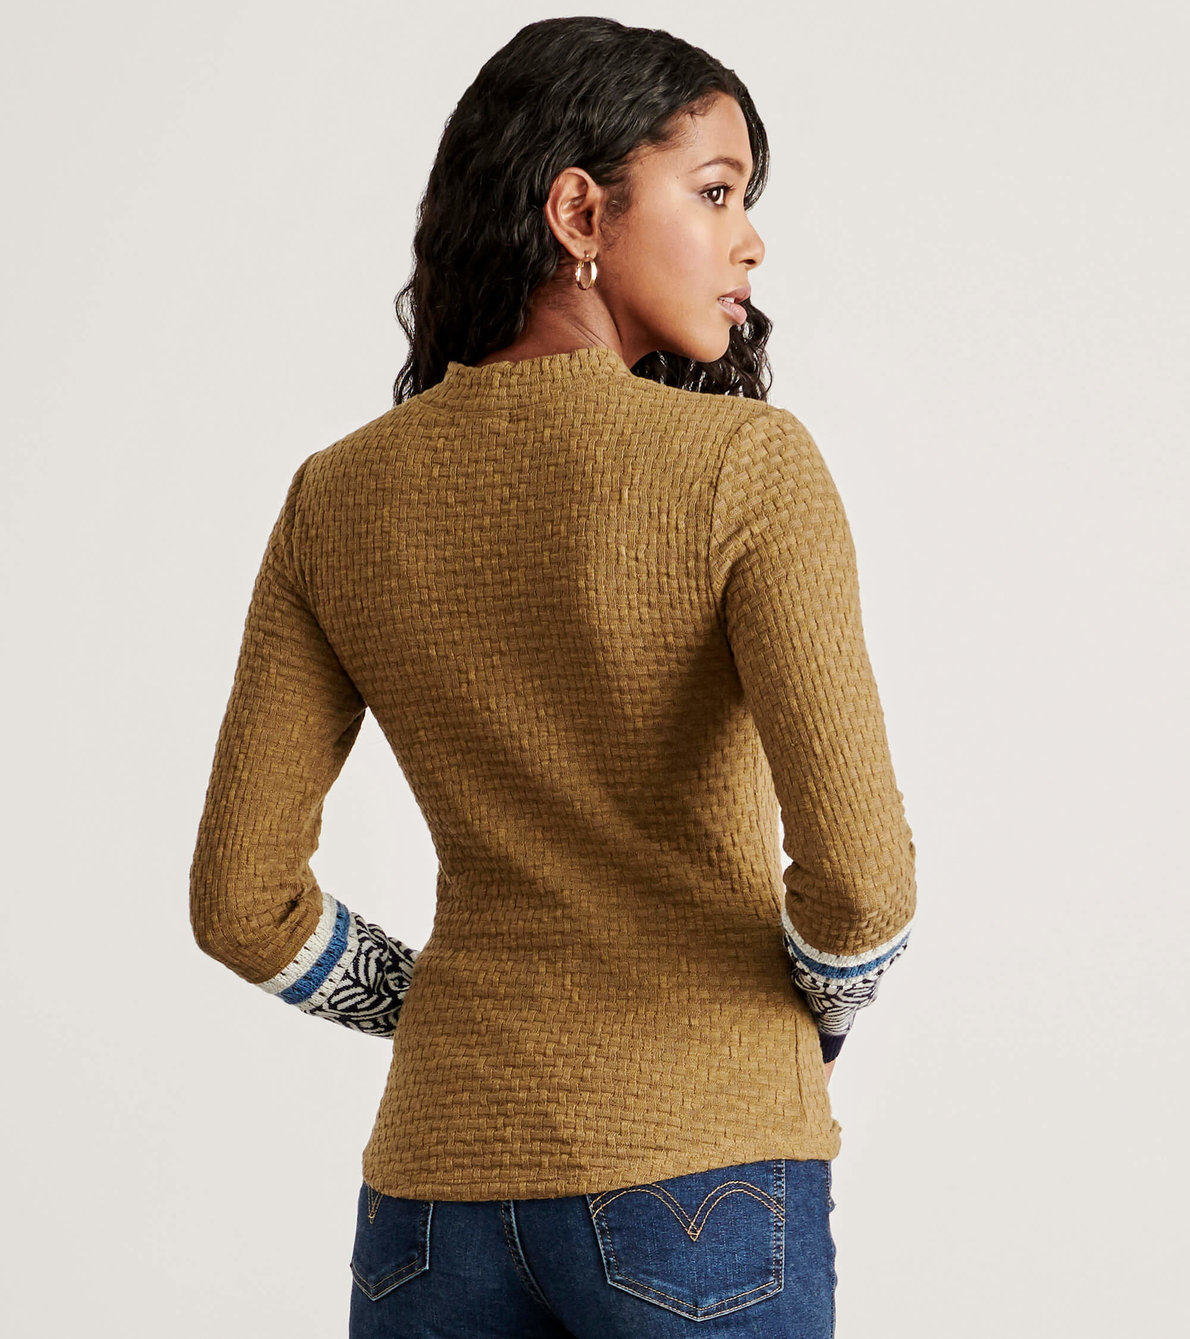 View larger image of Aspen Sweater - Military Olive